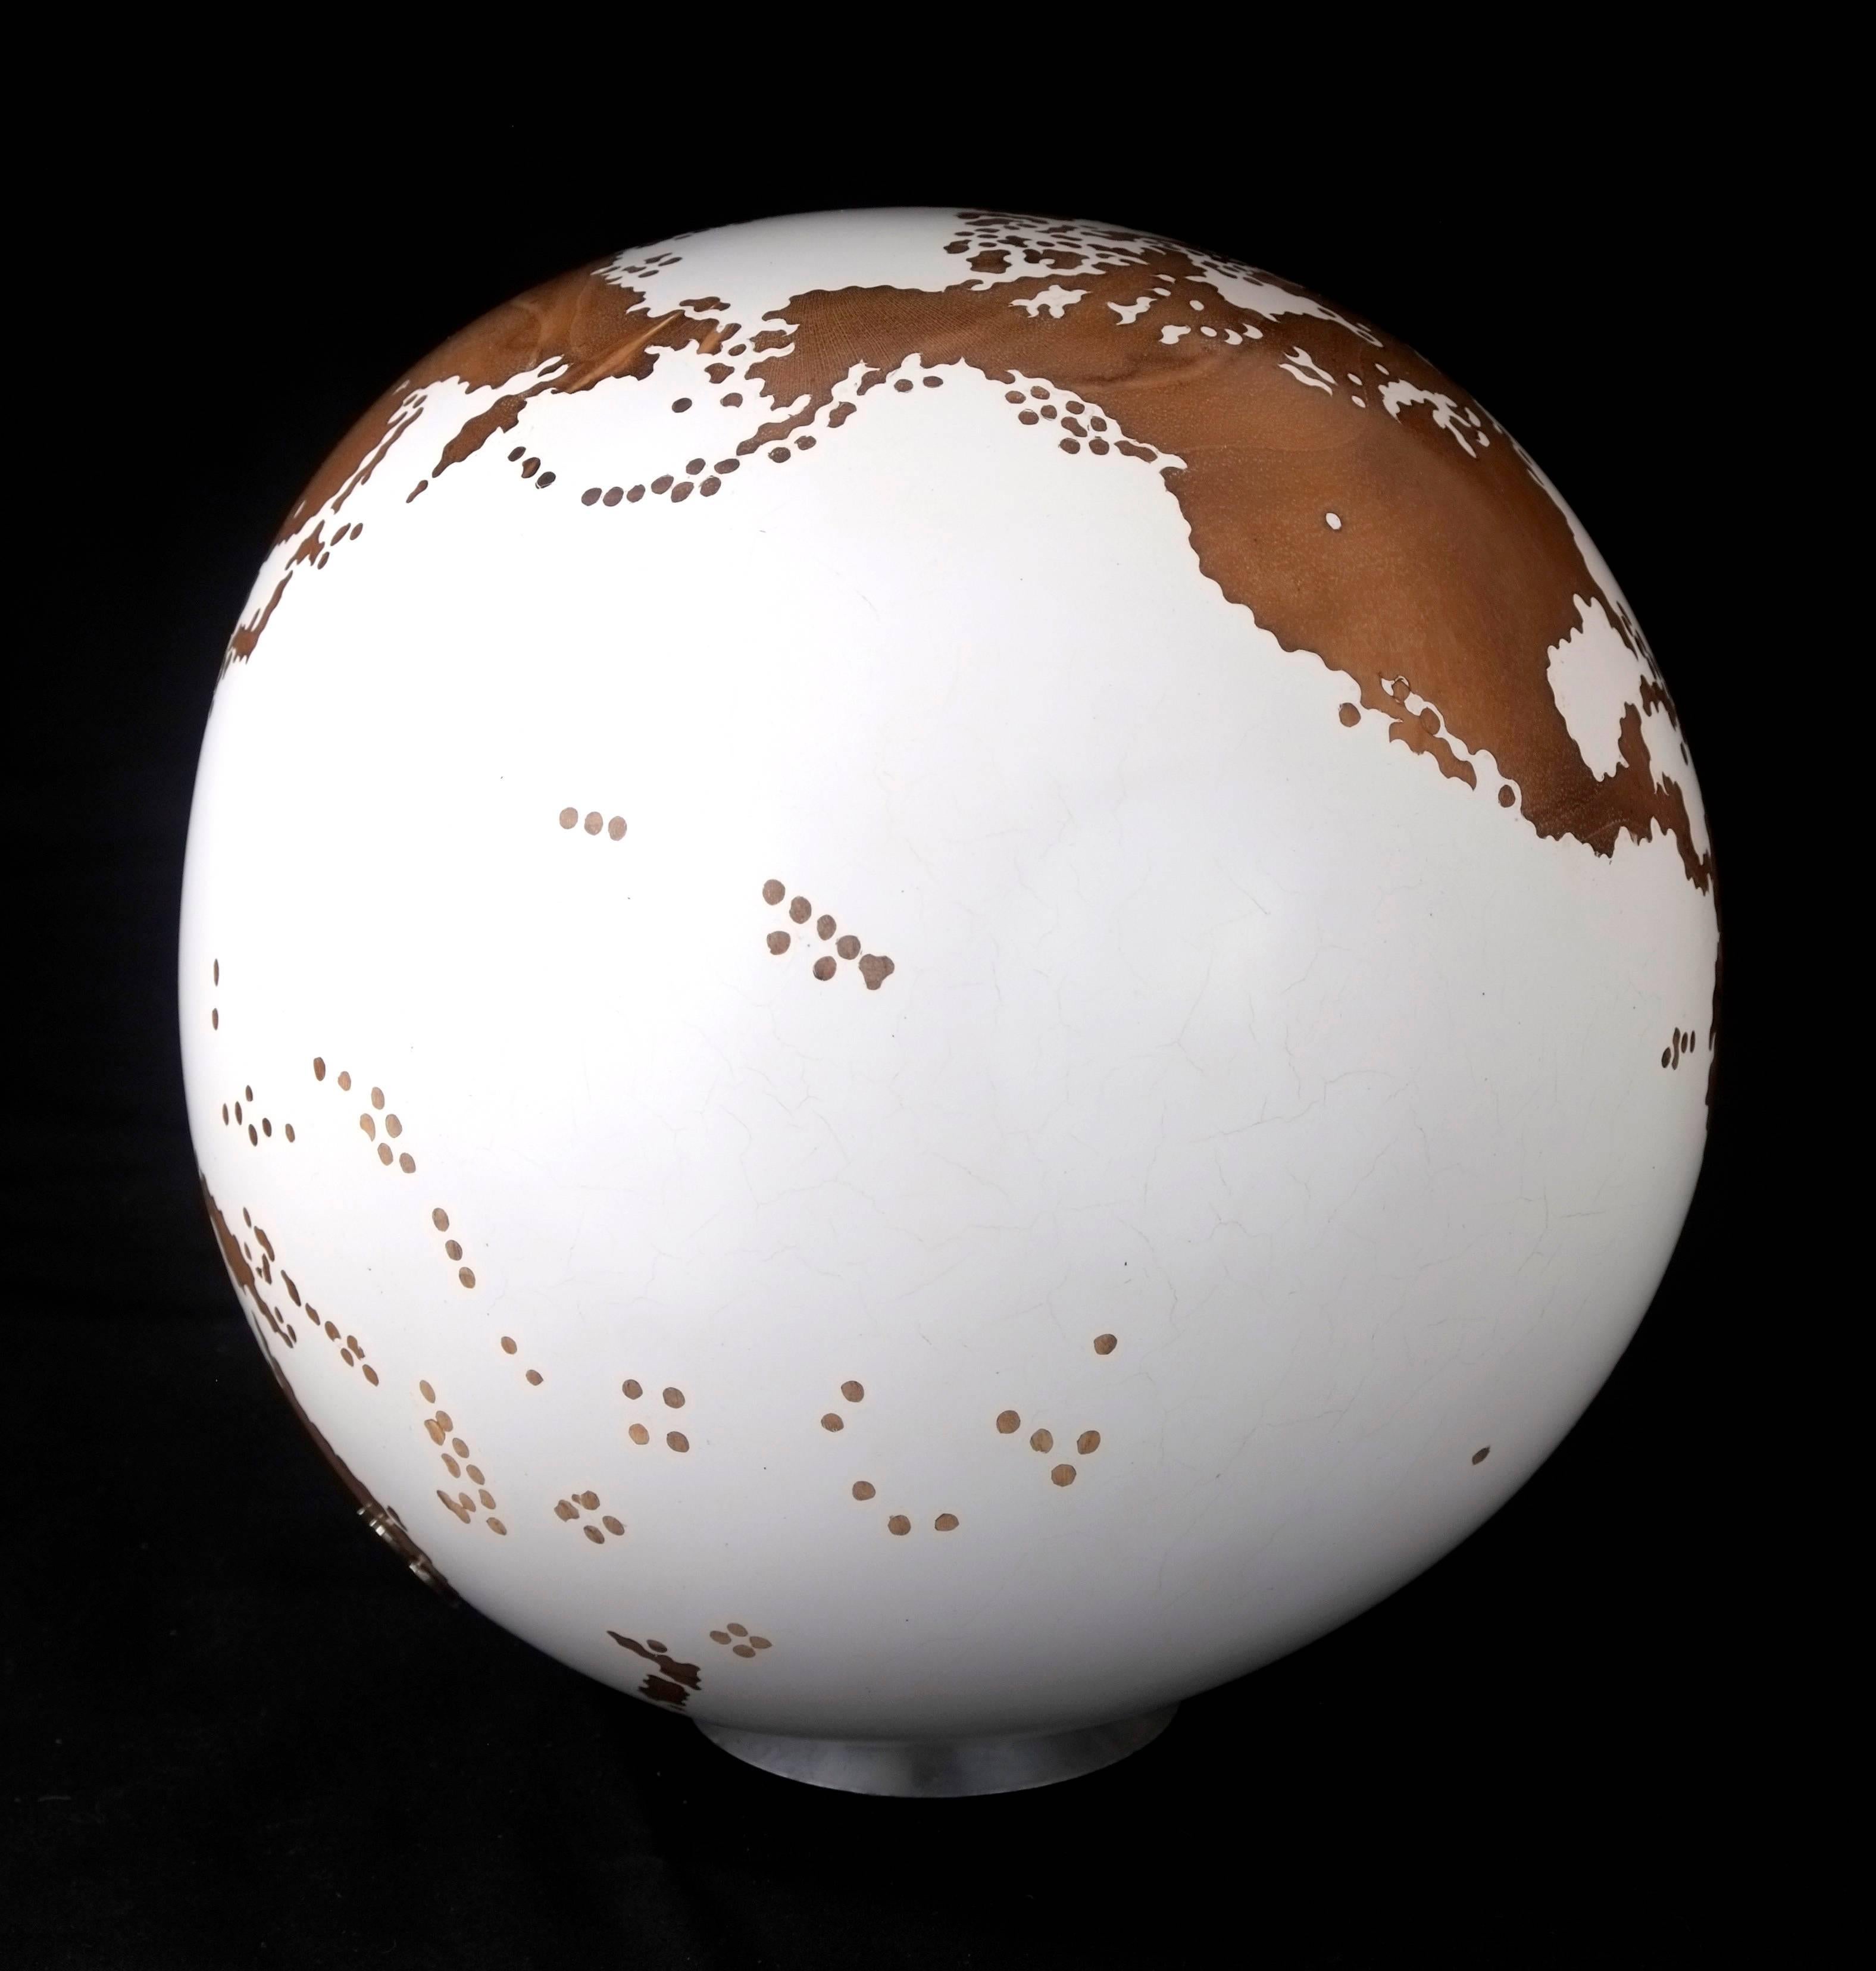 Balinese Contemporary Wooden Globe from Teak Root with Acrylic White Resin Finish, 20cm